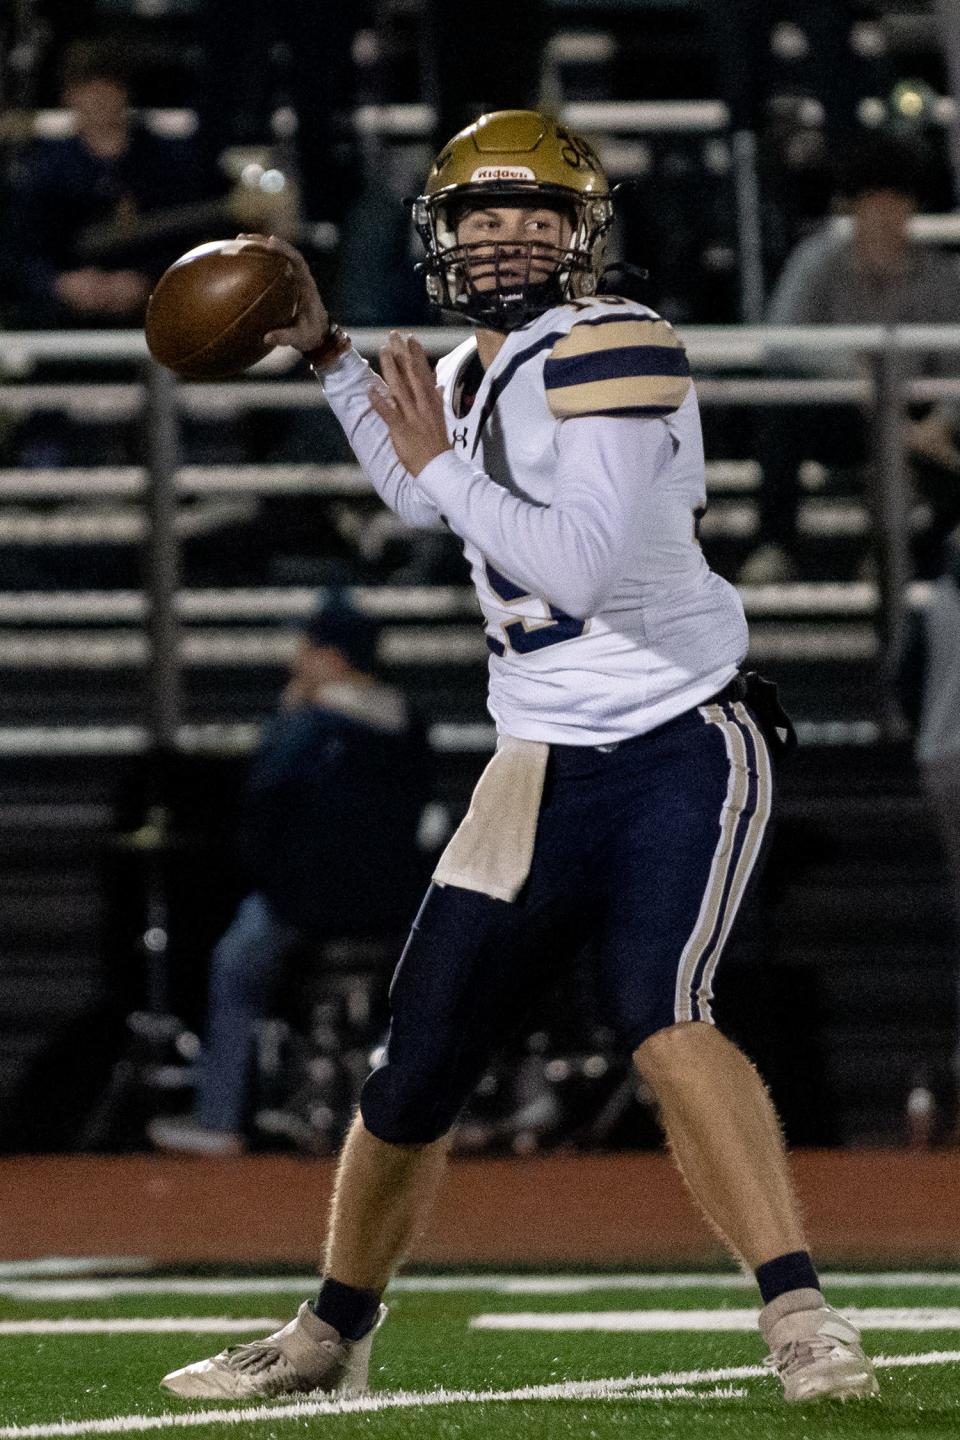 La Salle quarterback Tim Smith attempts a pass during Friday's game against Archbishop Wood.